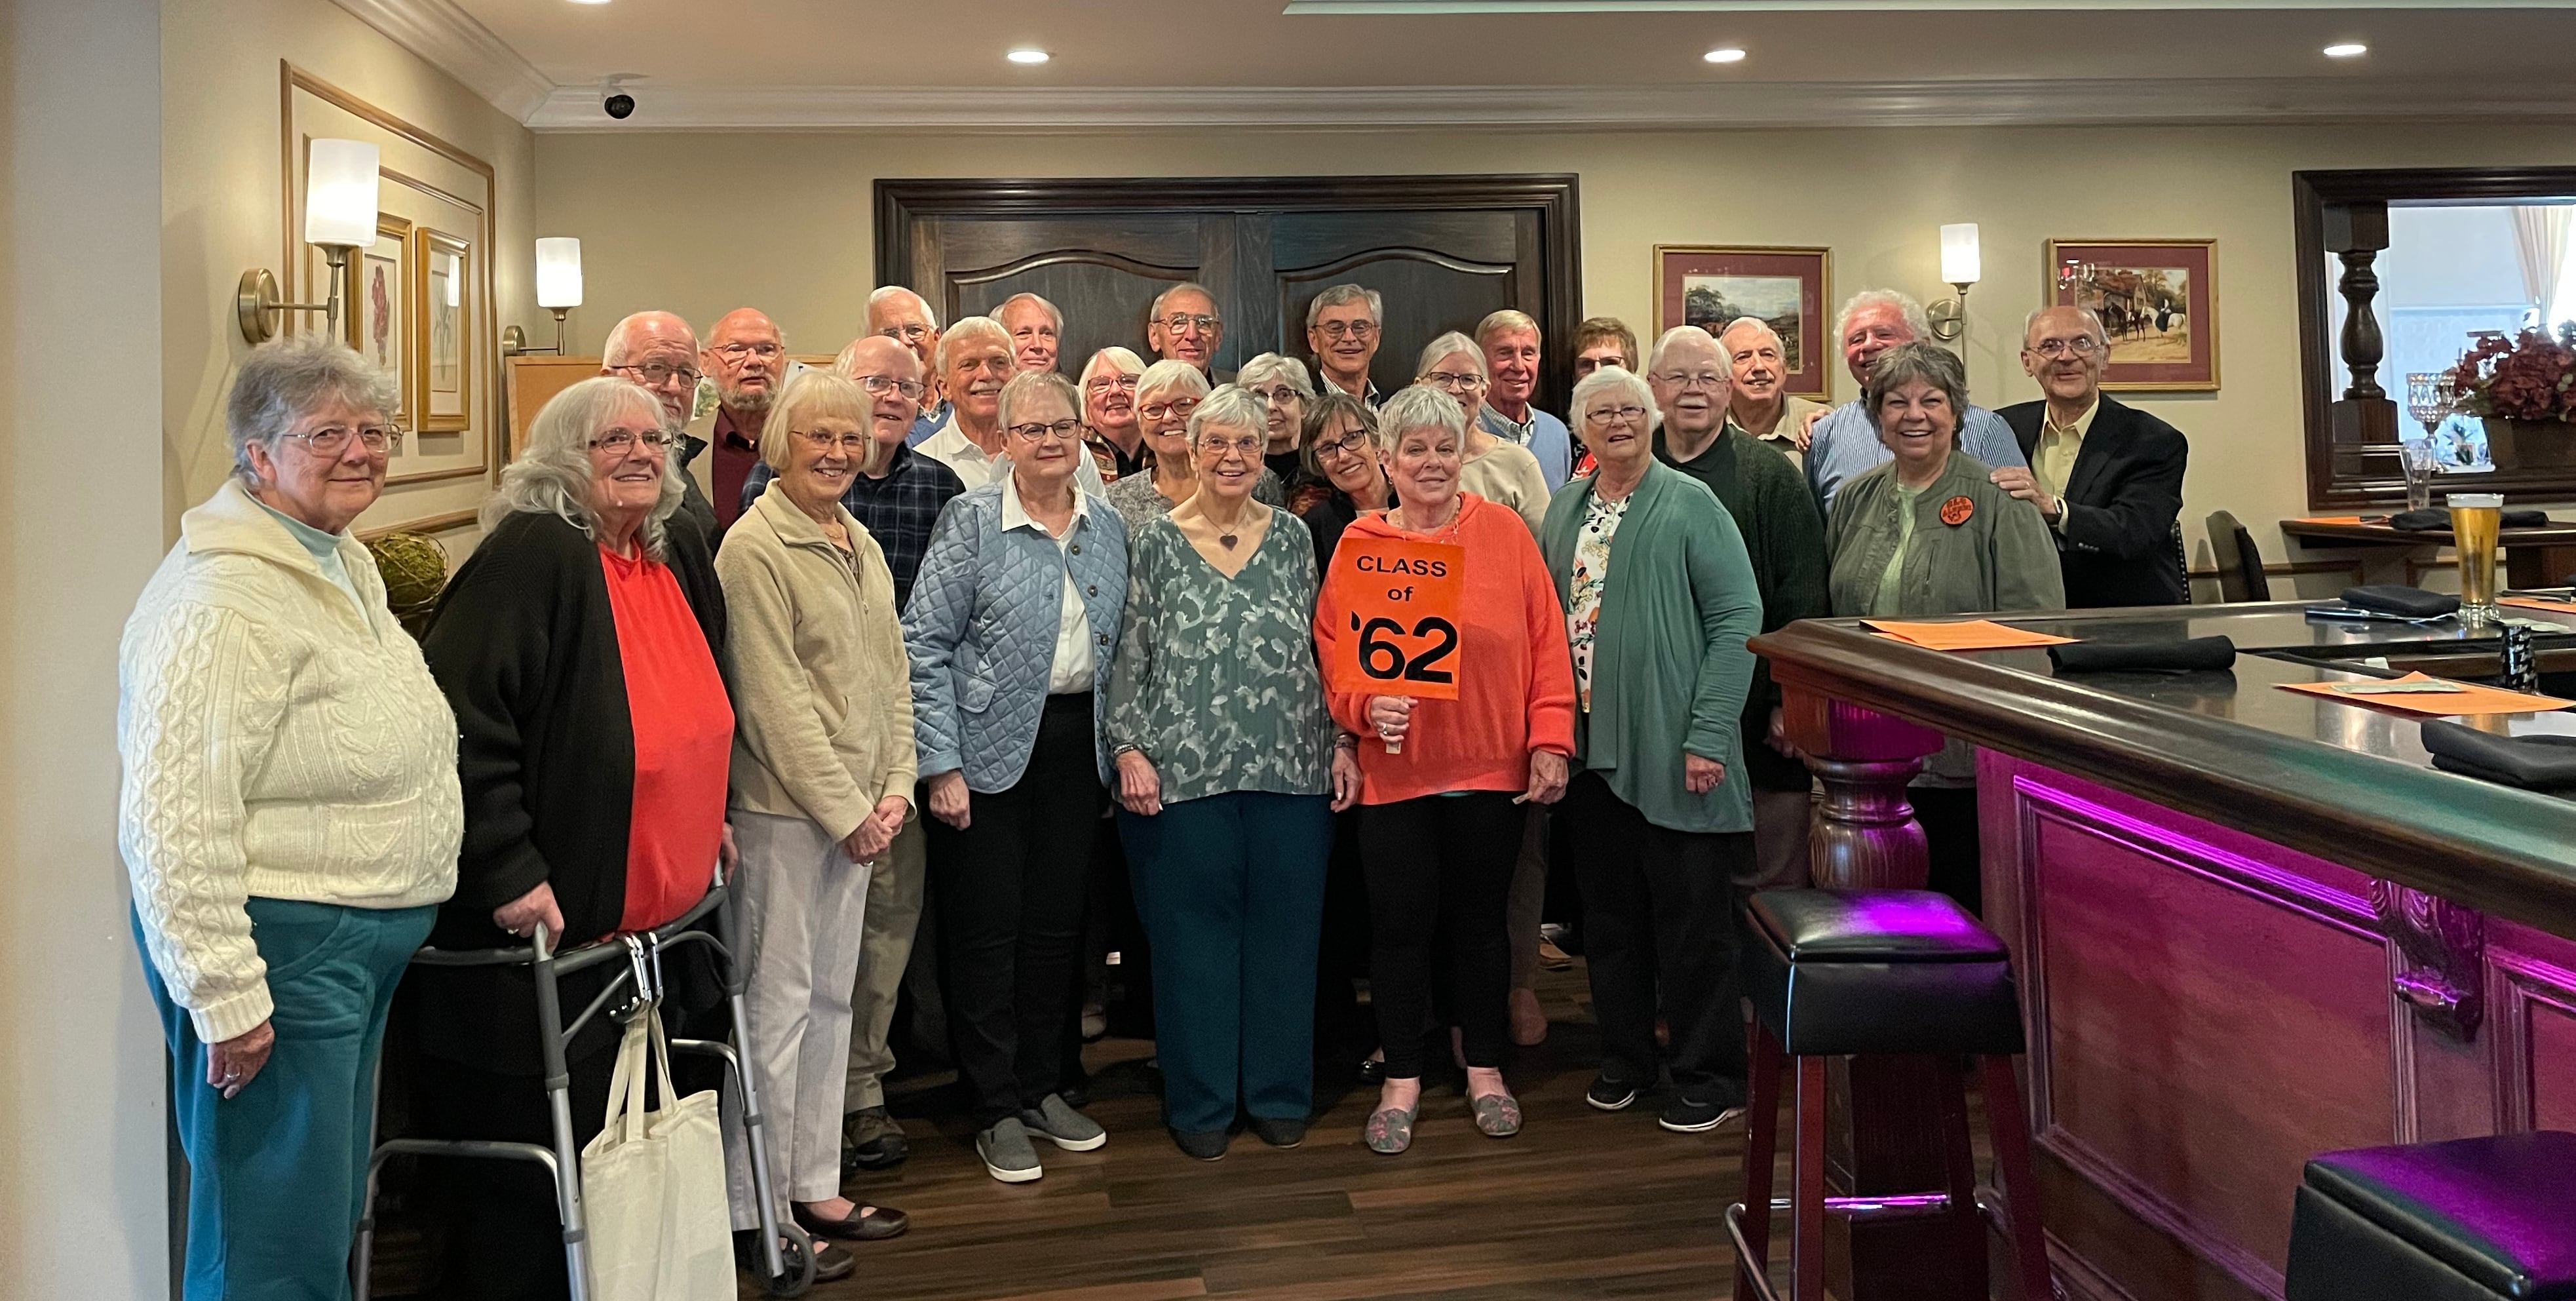 Crystal Lake Central Class of 1962 celebrates 60th class reunion